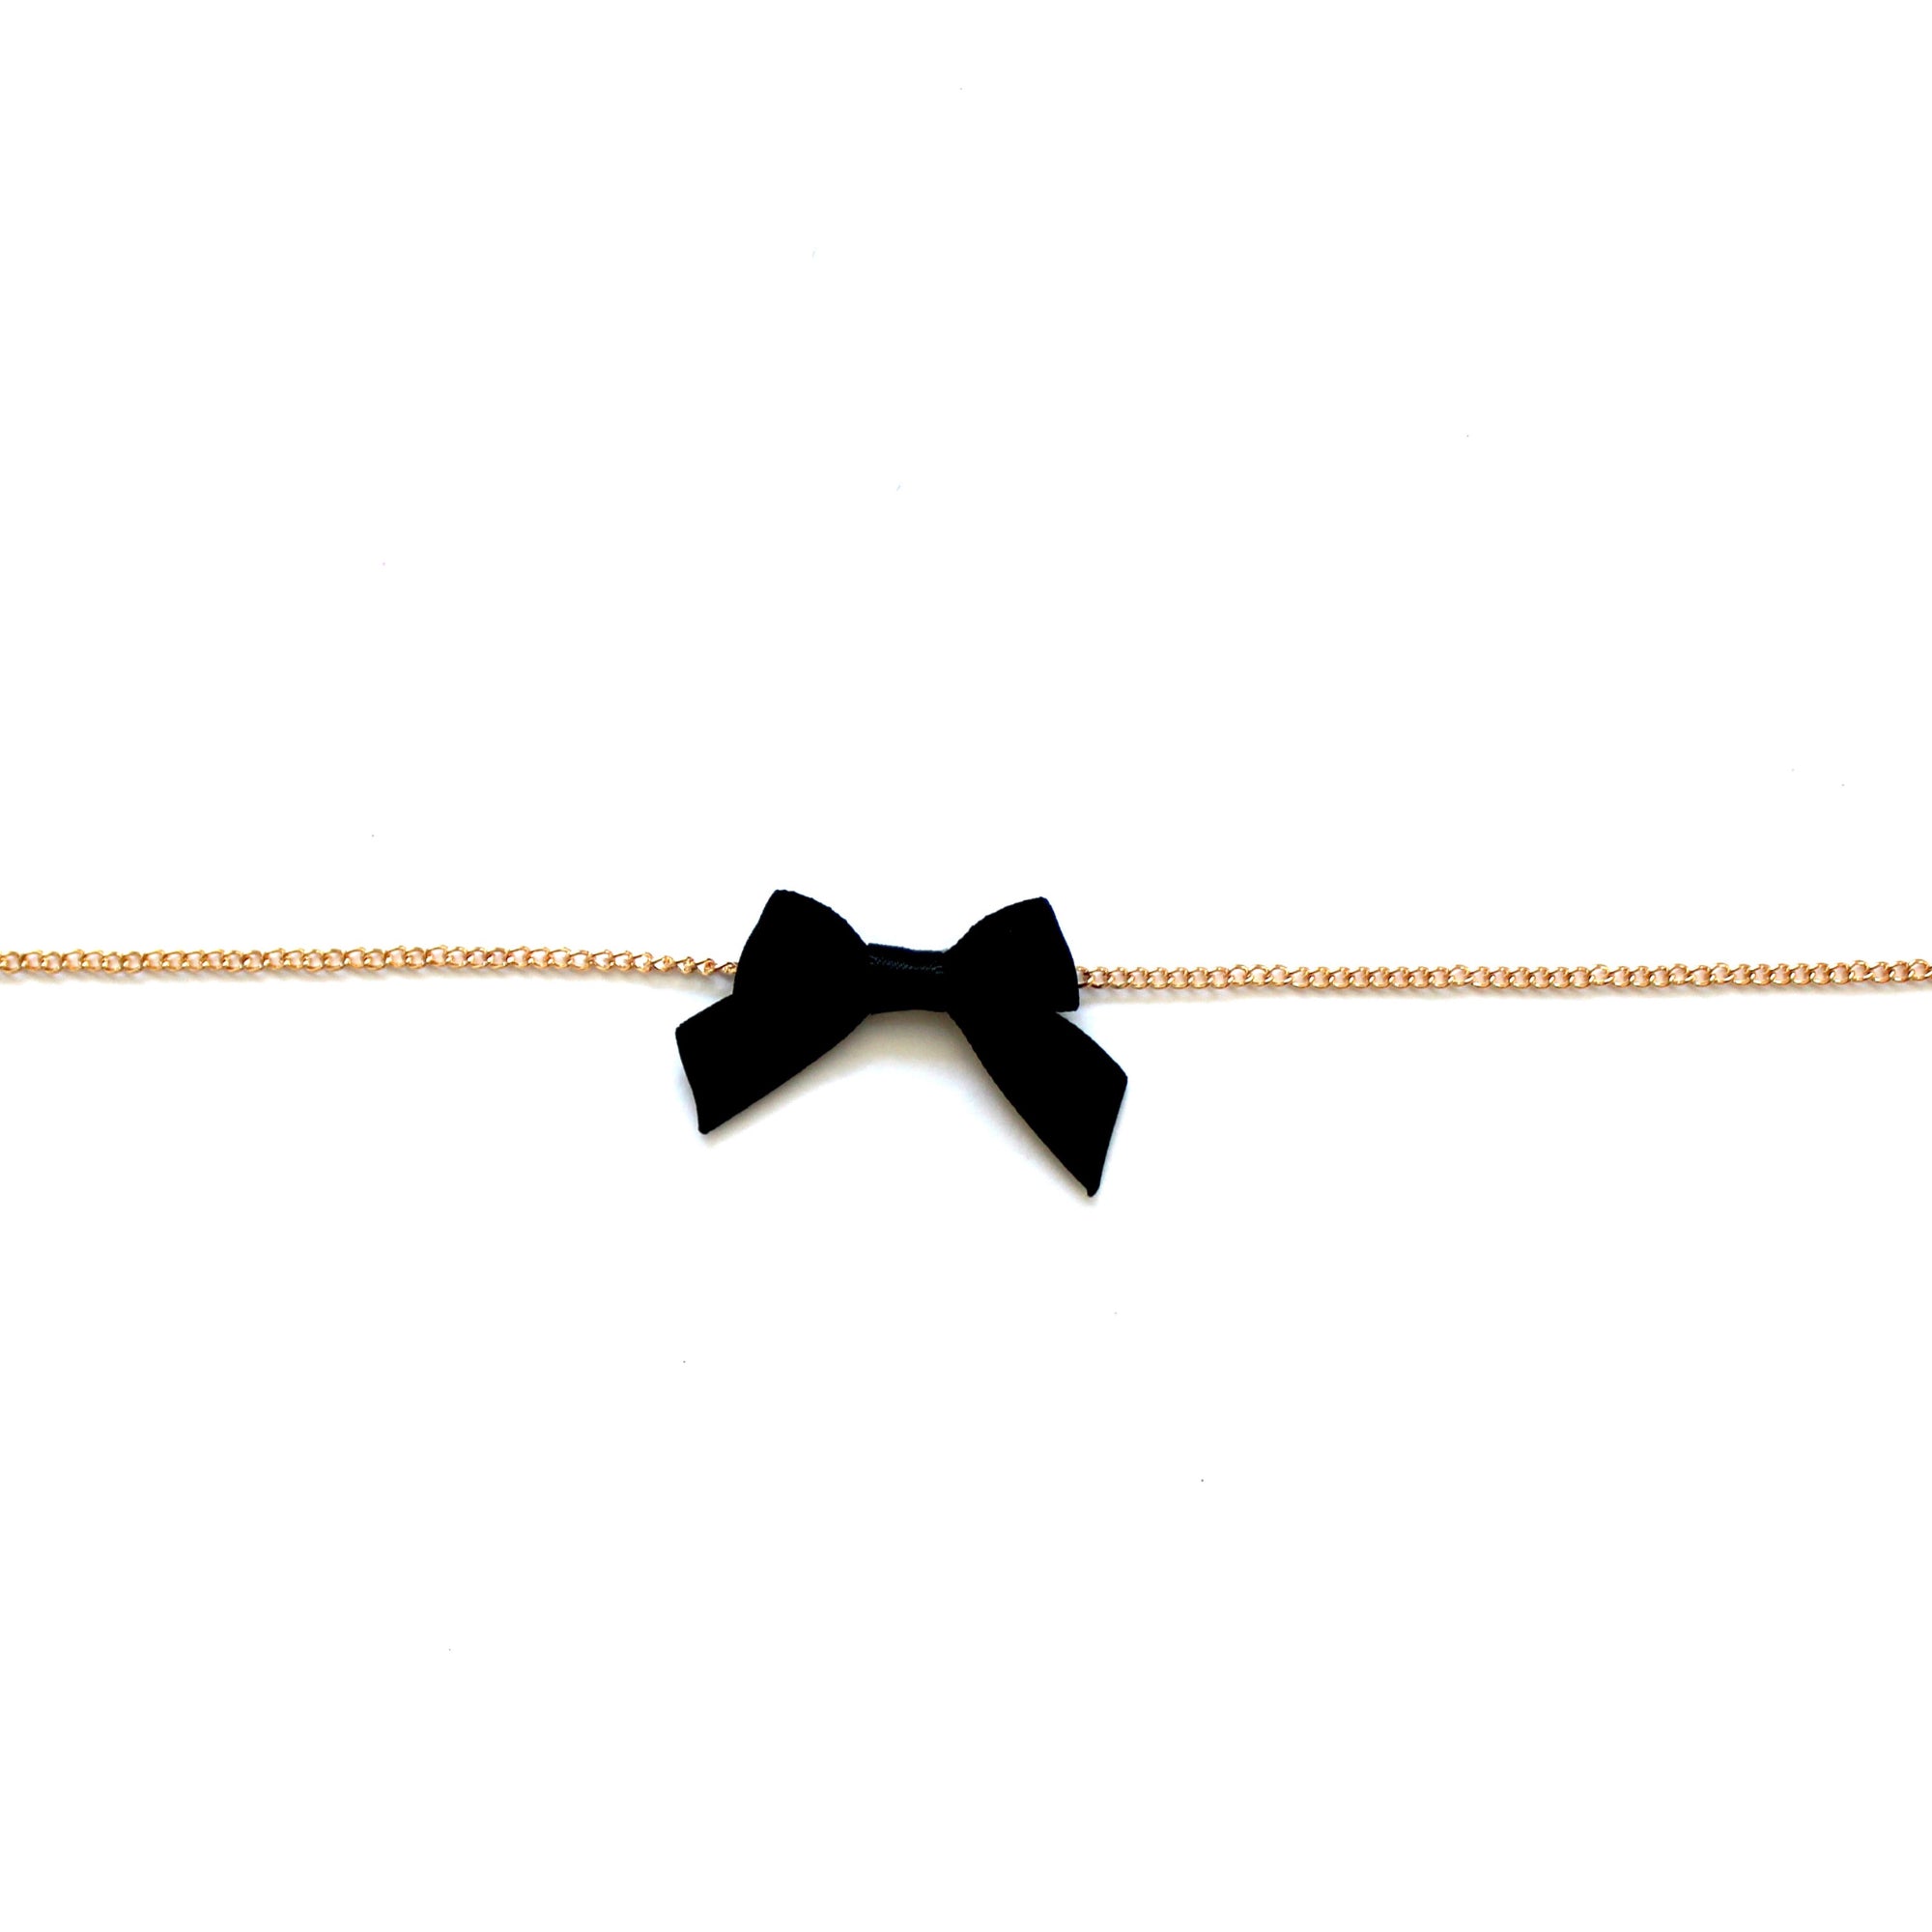 Honey Black Bow with Gold Chain Belt